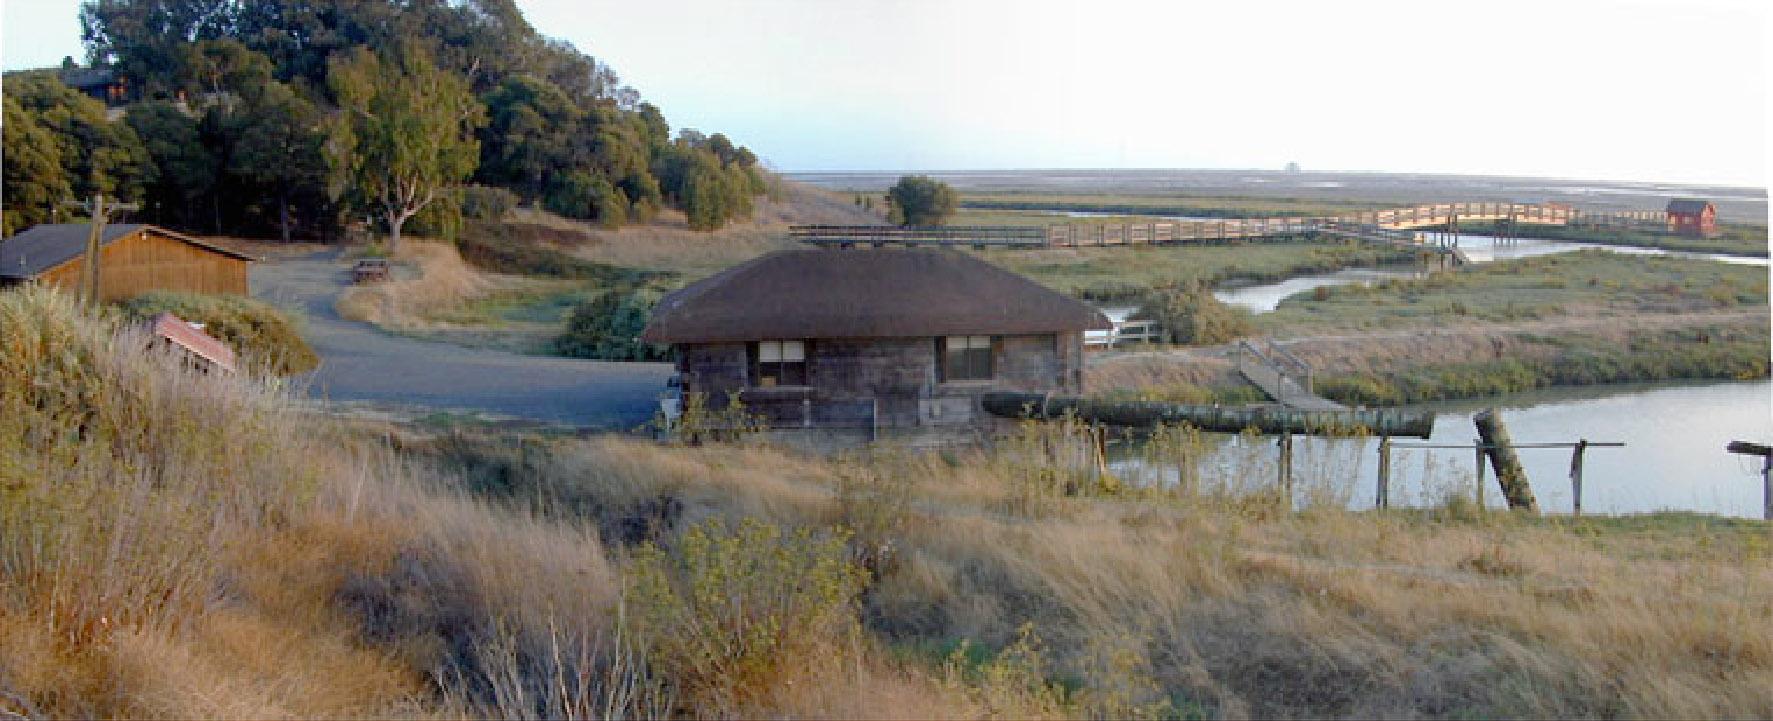 Pump house that had been renovated into an environmental education classroom. Photo by Dr. Chris Kitting